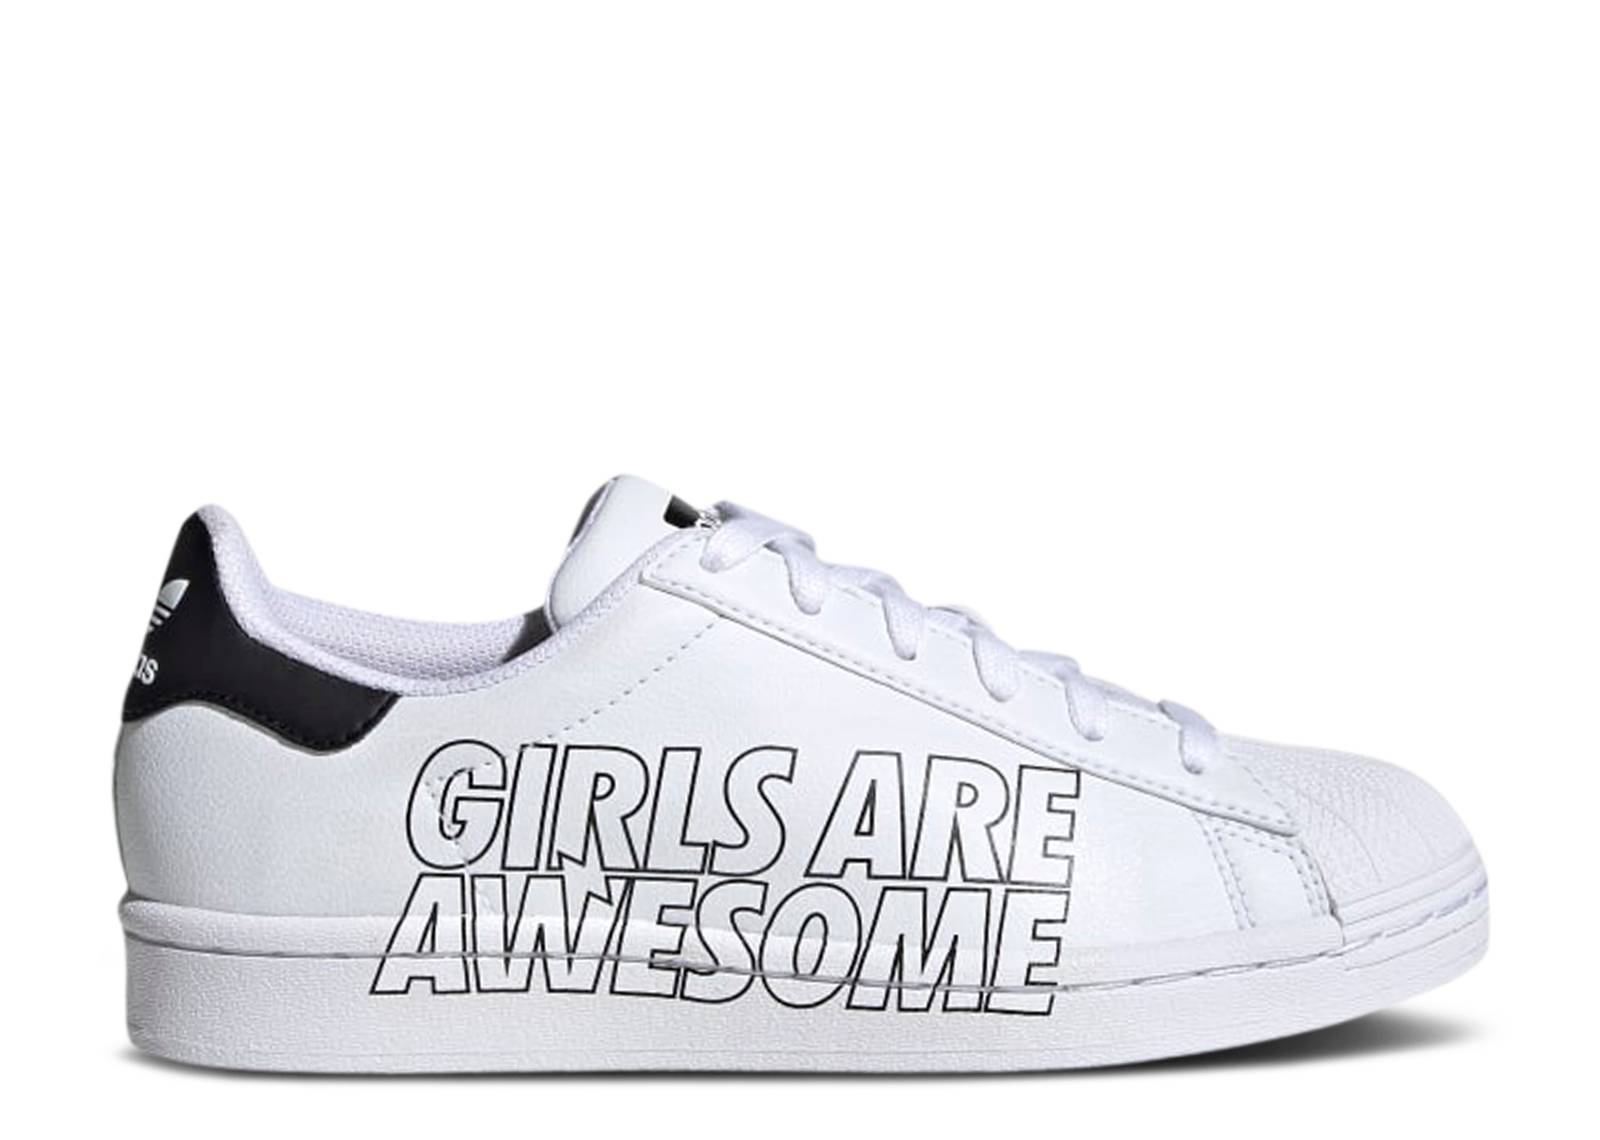 Girls Are Awesome x Superstar J 'Wordmark'